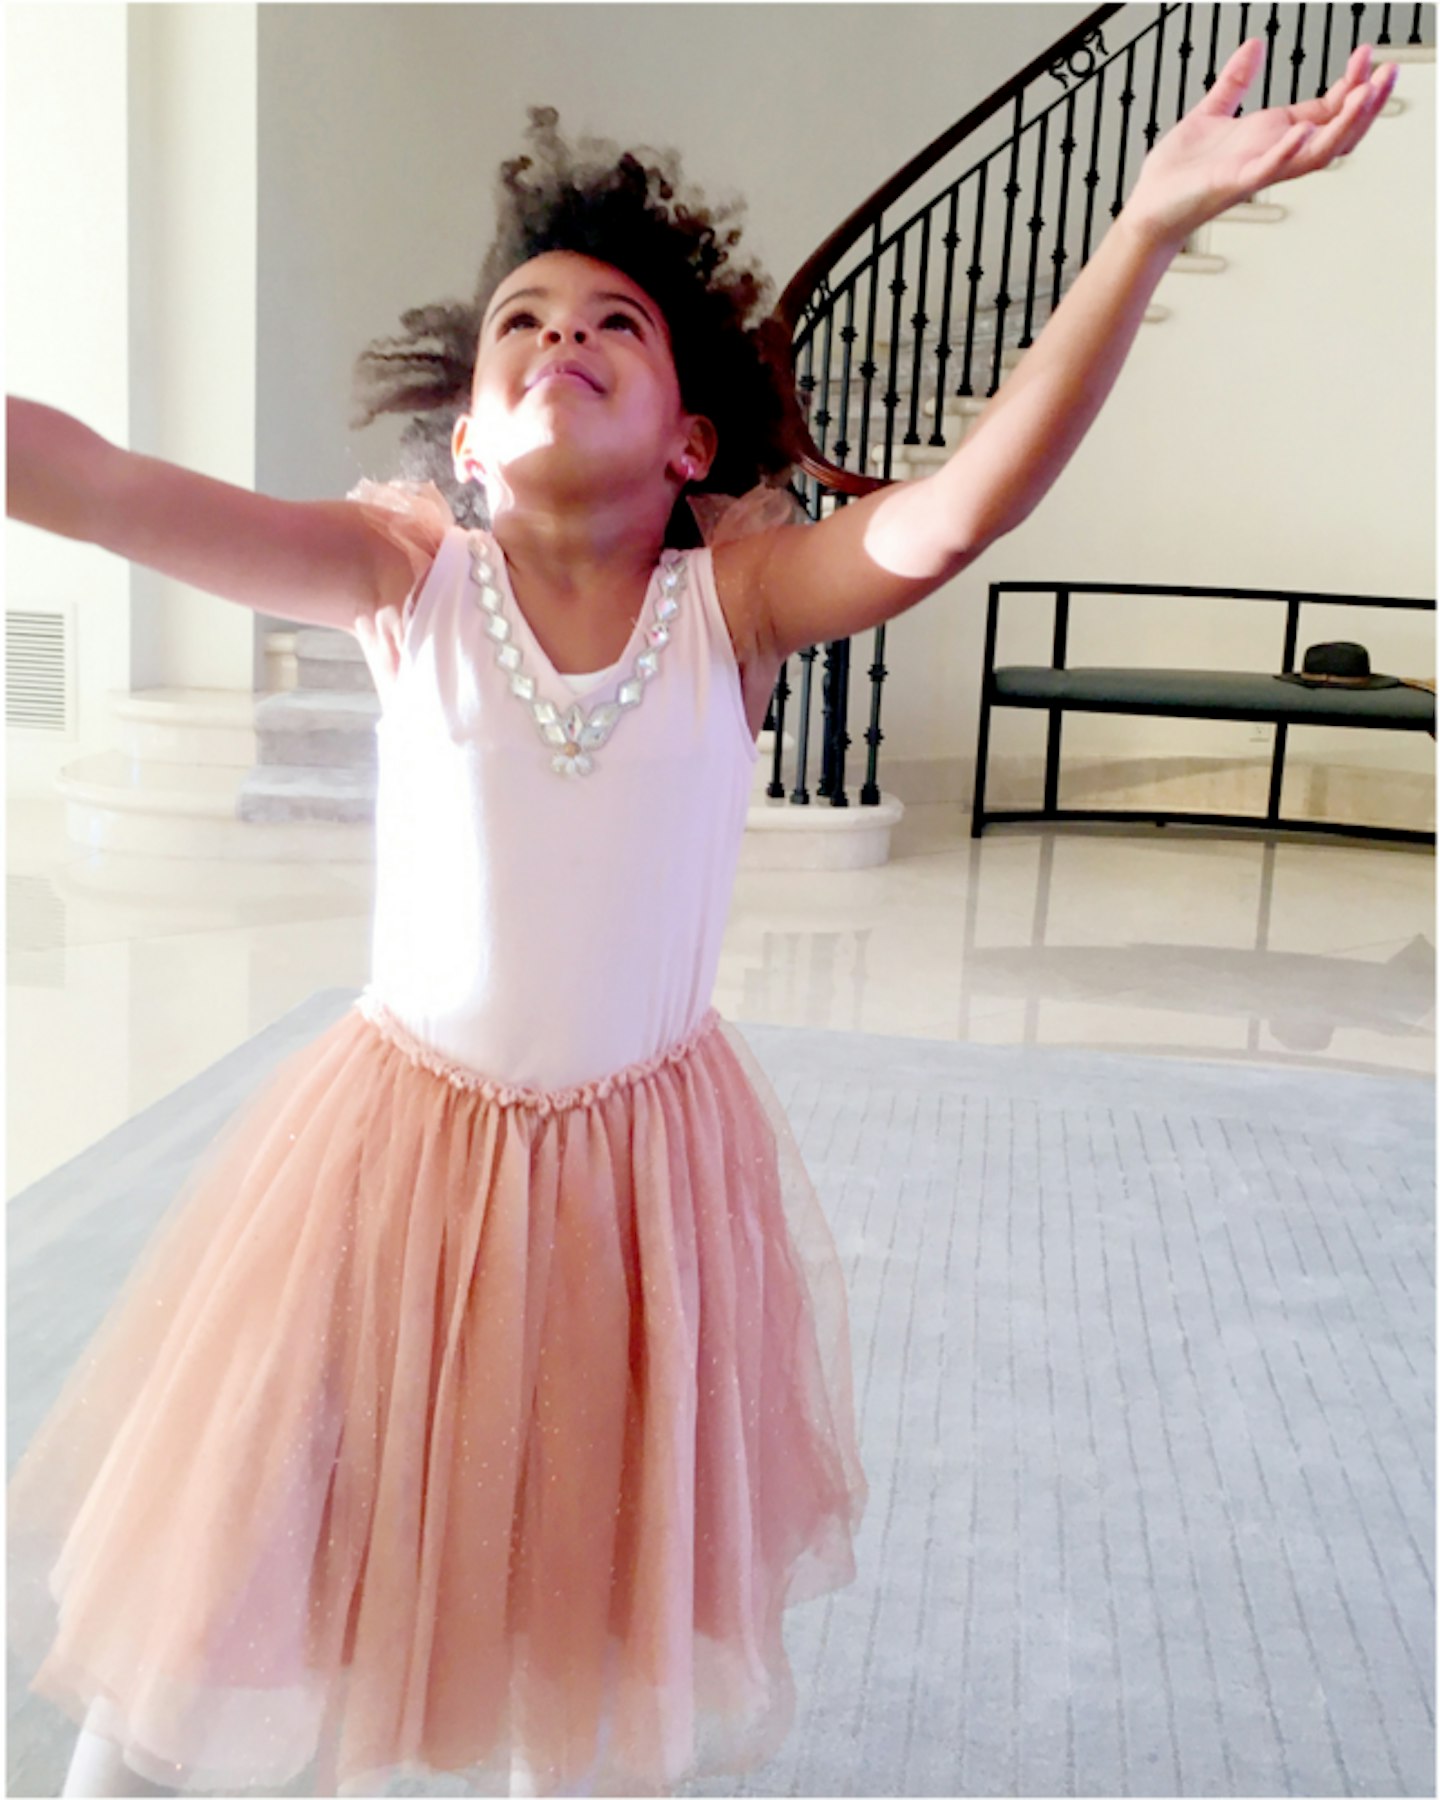 Blue Ivy Beyonce 4th birthday party